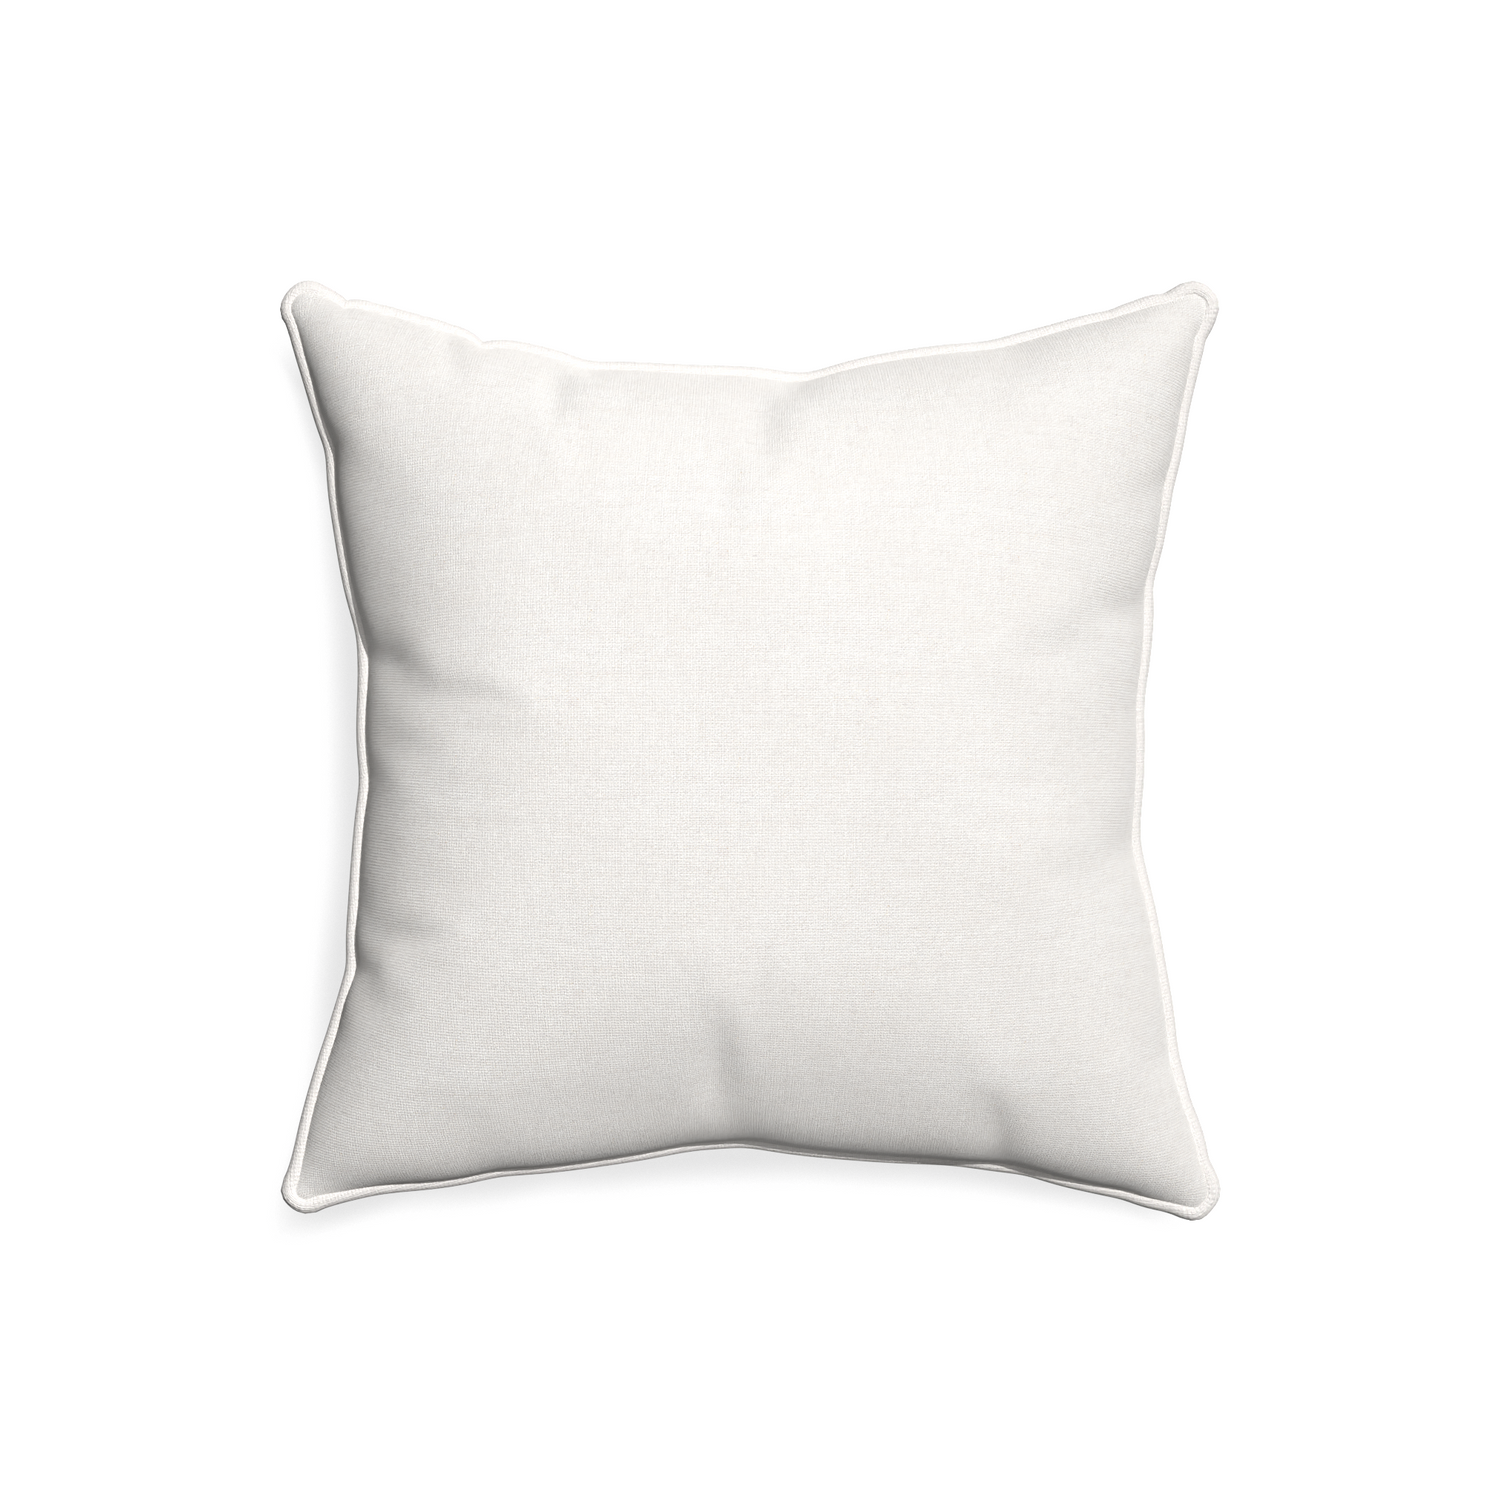 20-square flour custom pillow with snow piping on white background